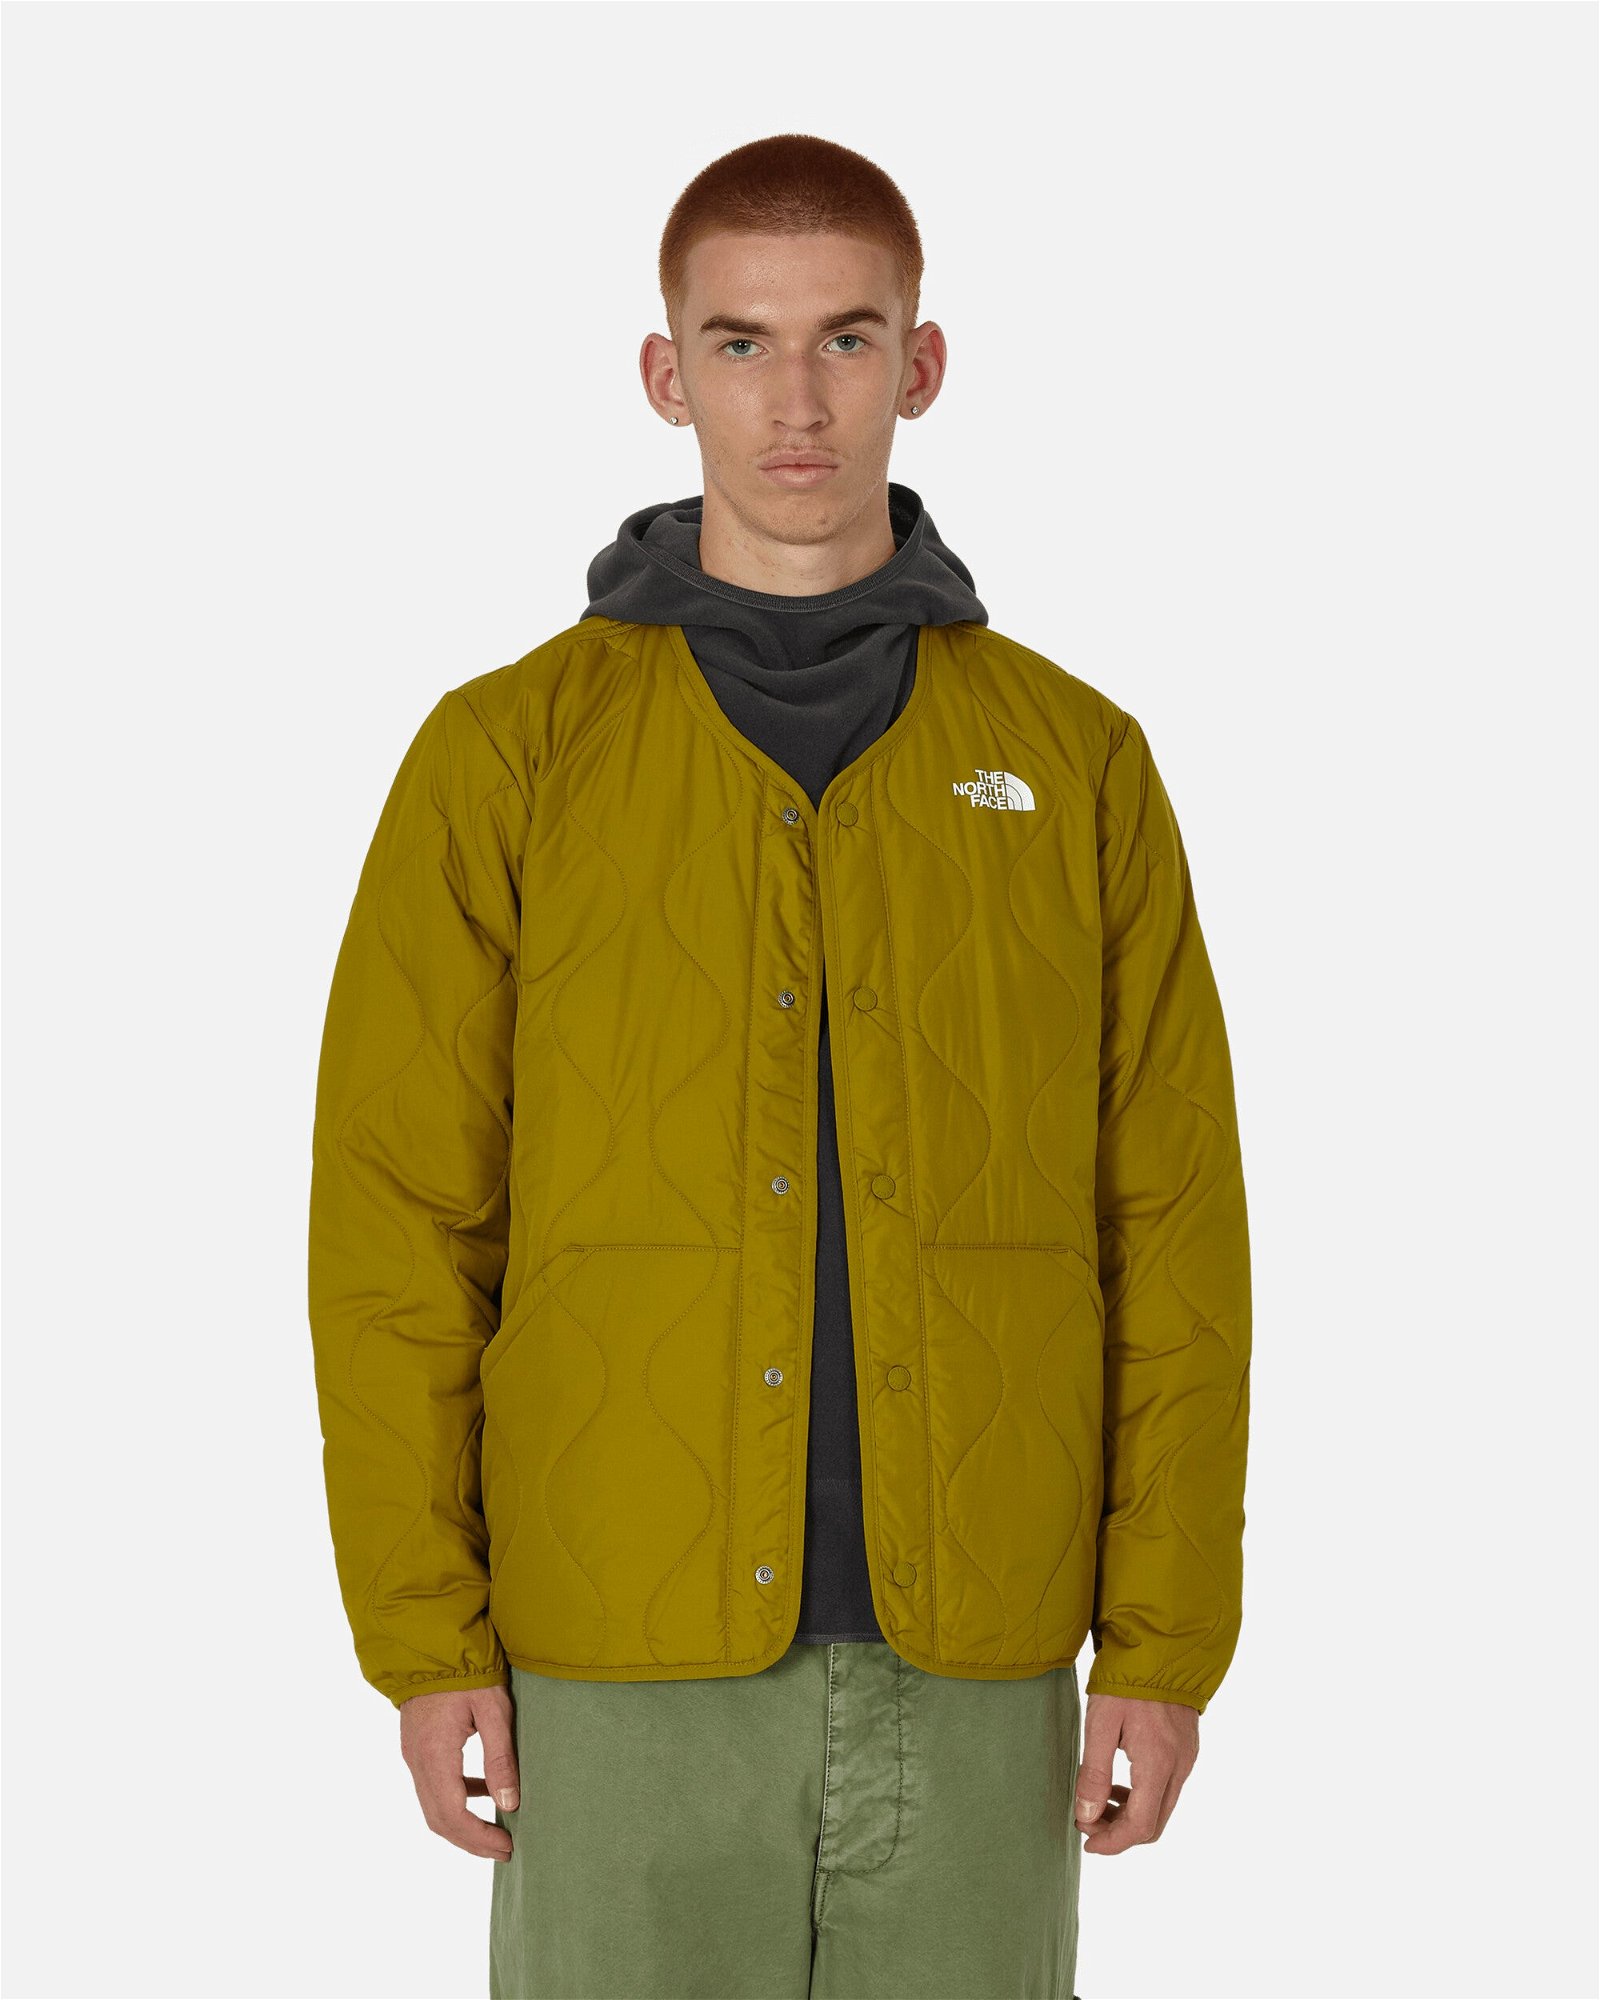 The Moss | North Jacke Quilted Sulphur FLEXDOG Face I0N1 Ampato NF0A852A Liner